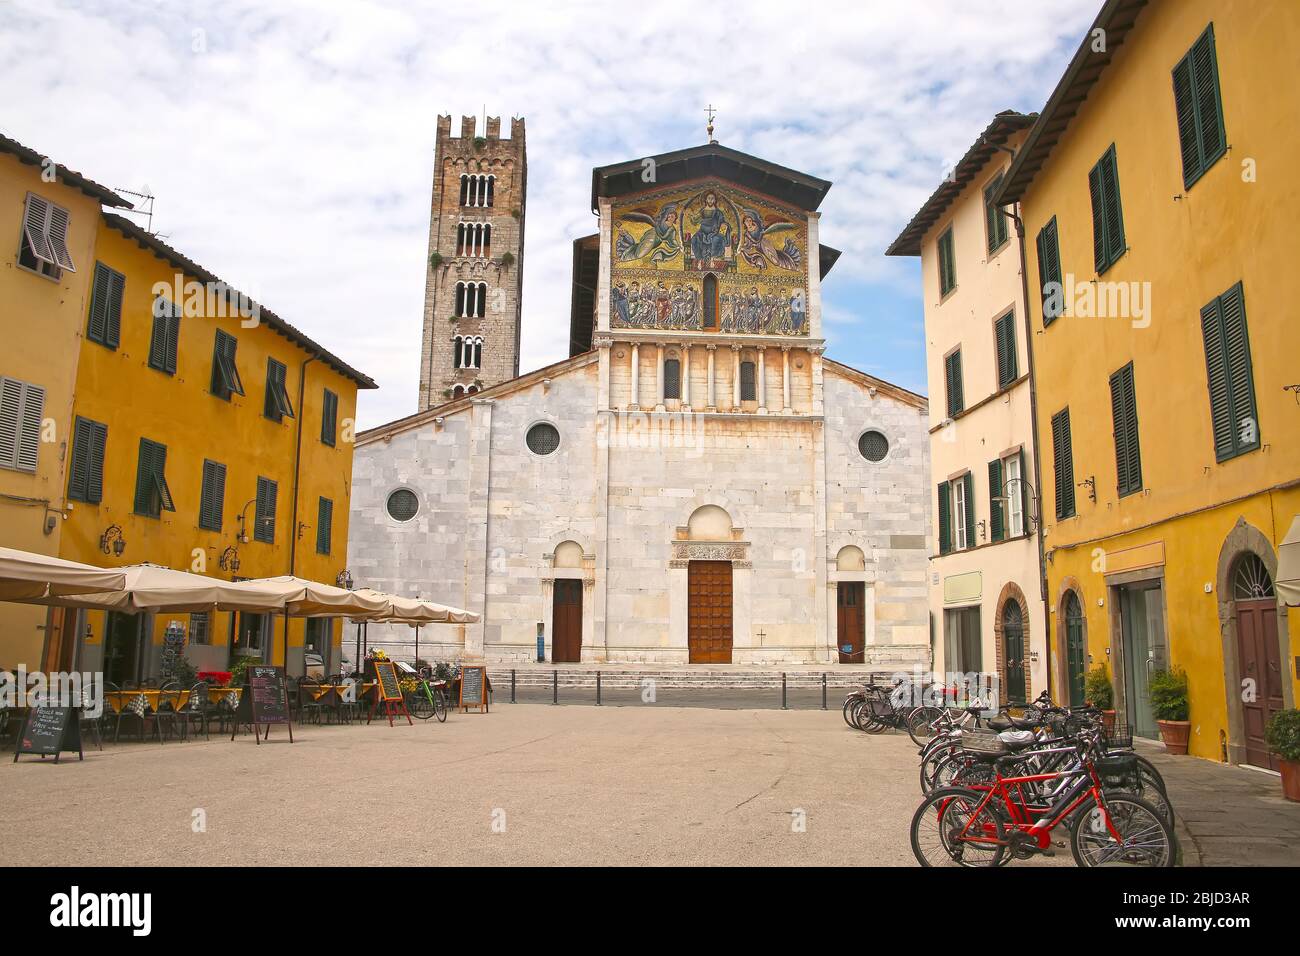 The Basilica of San Frediano is a Romanesque church situated on the Piazza San Frediano, Lucca, Tuscany, Italy. Stock Photo